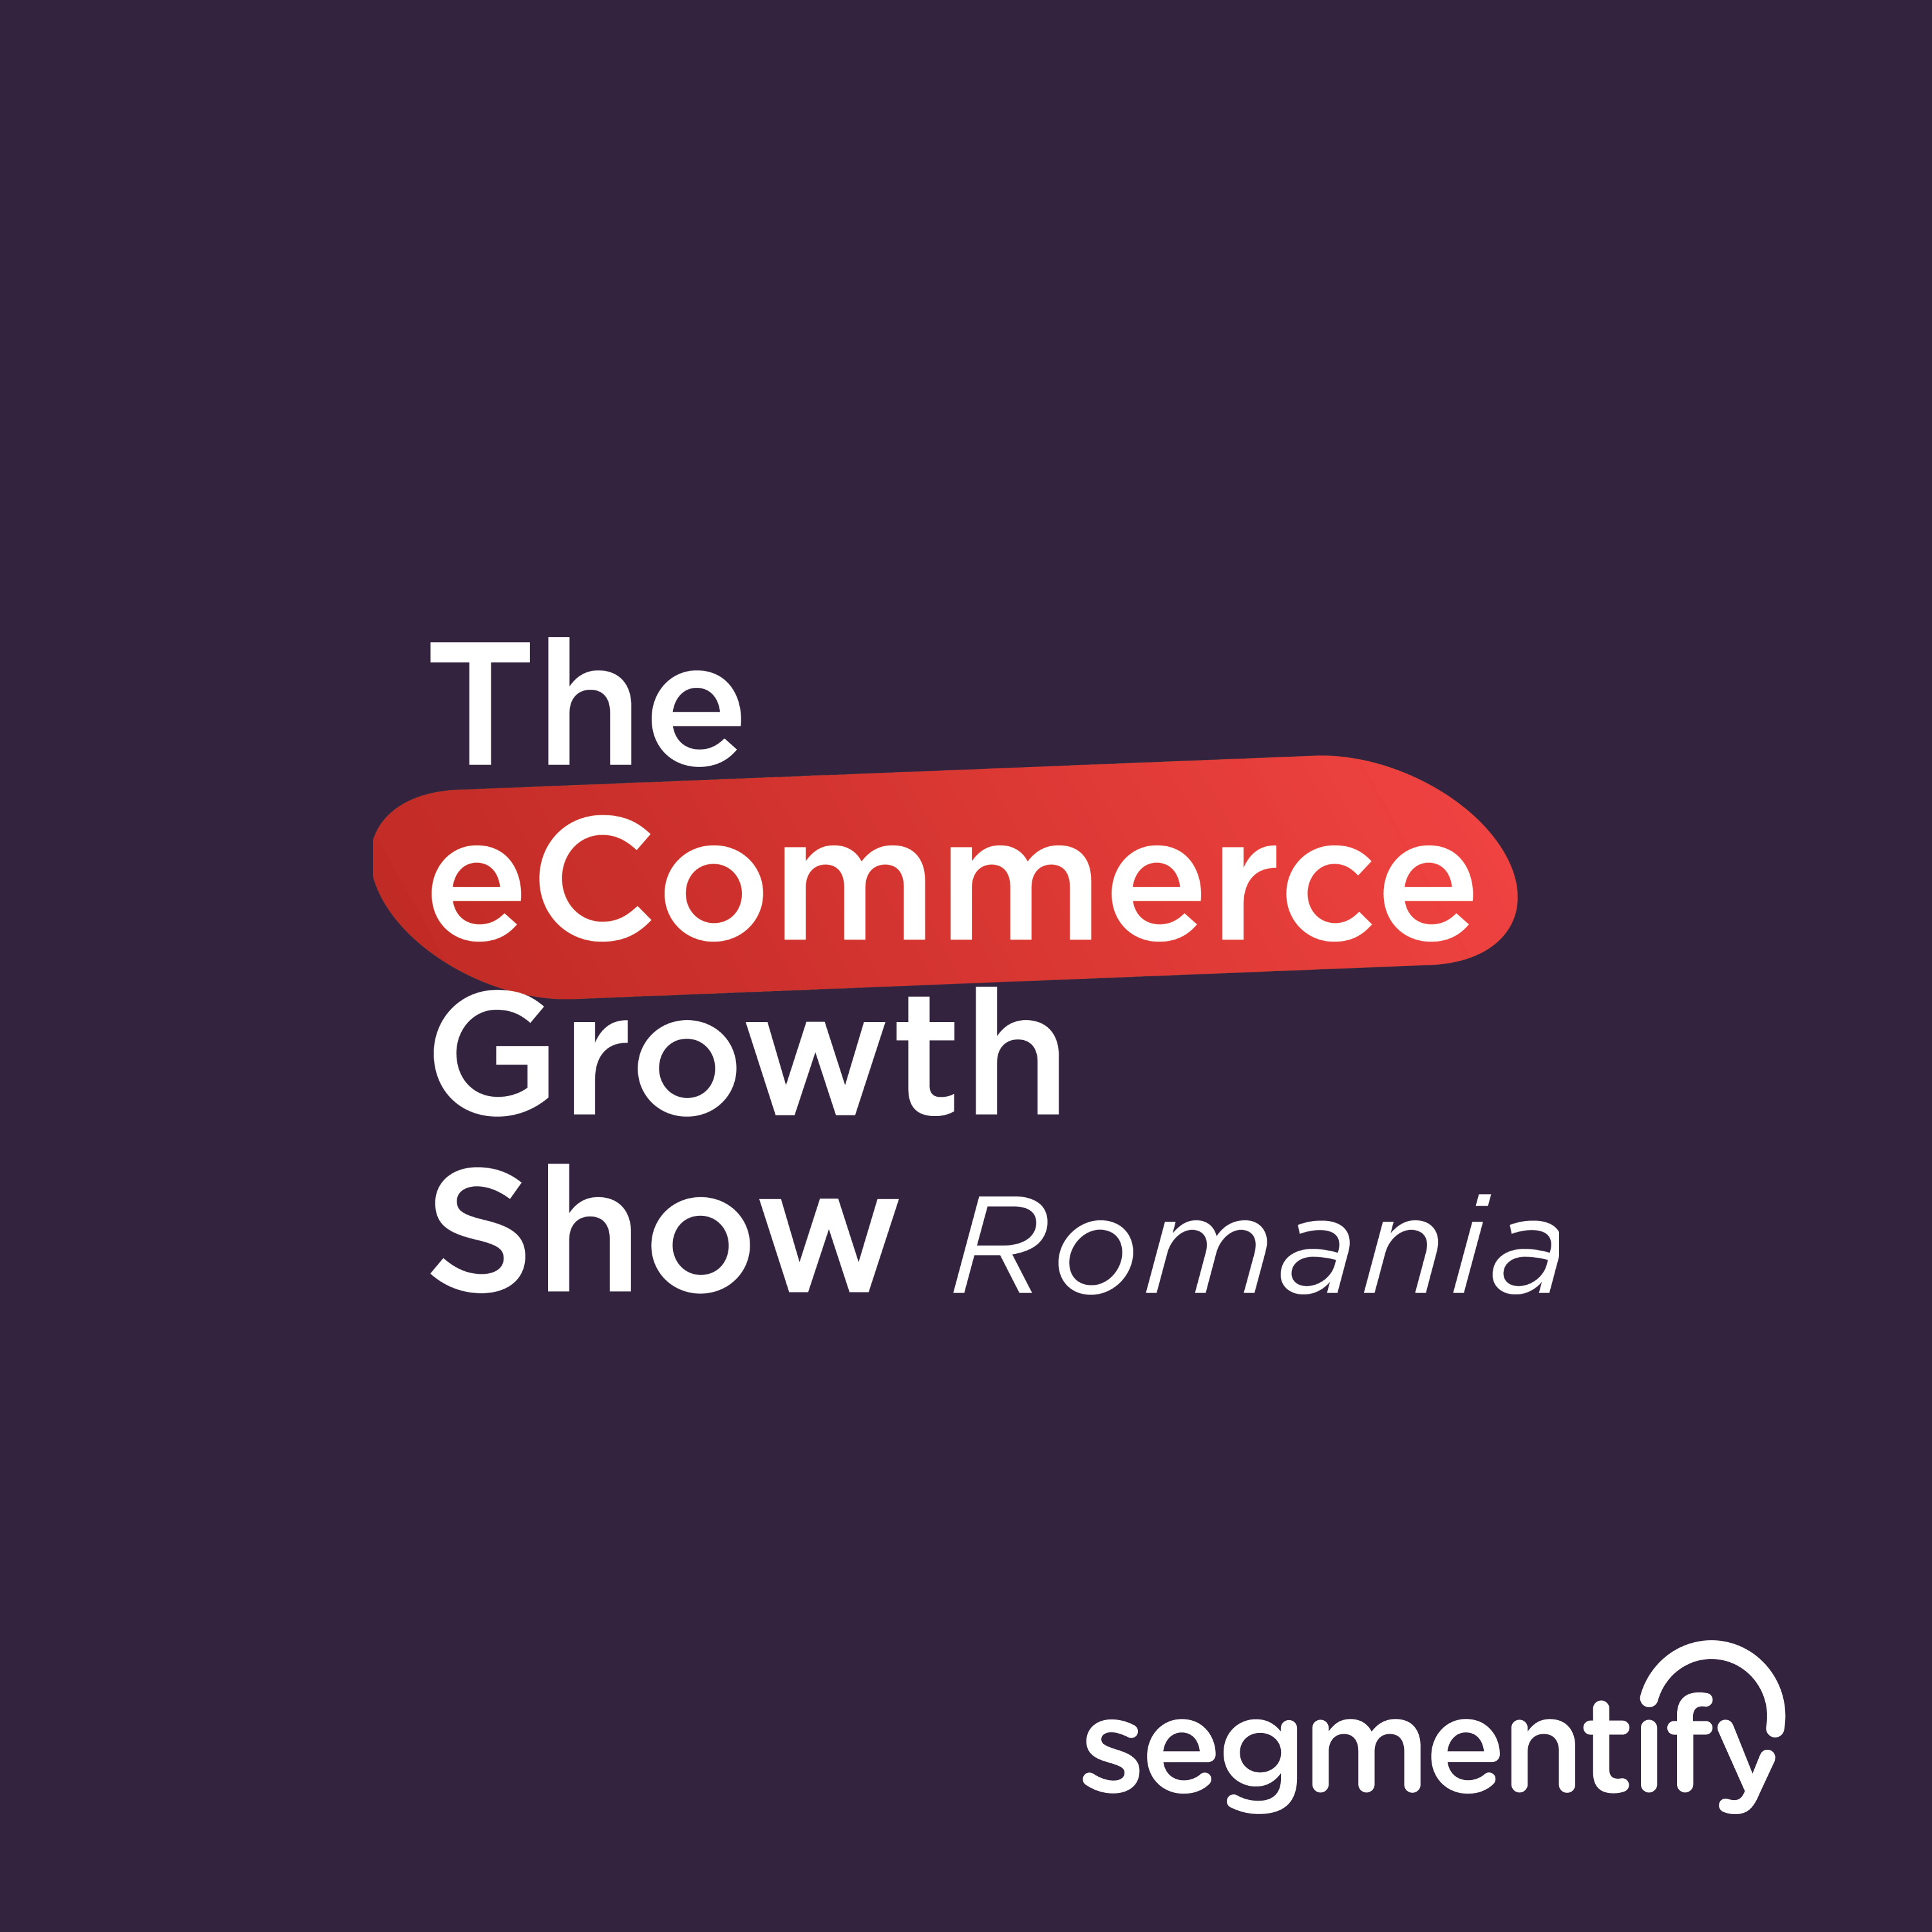 Artwork for The eCommerce Growth Show Romania